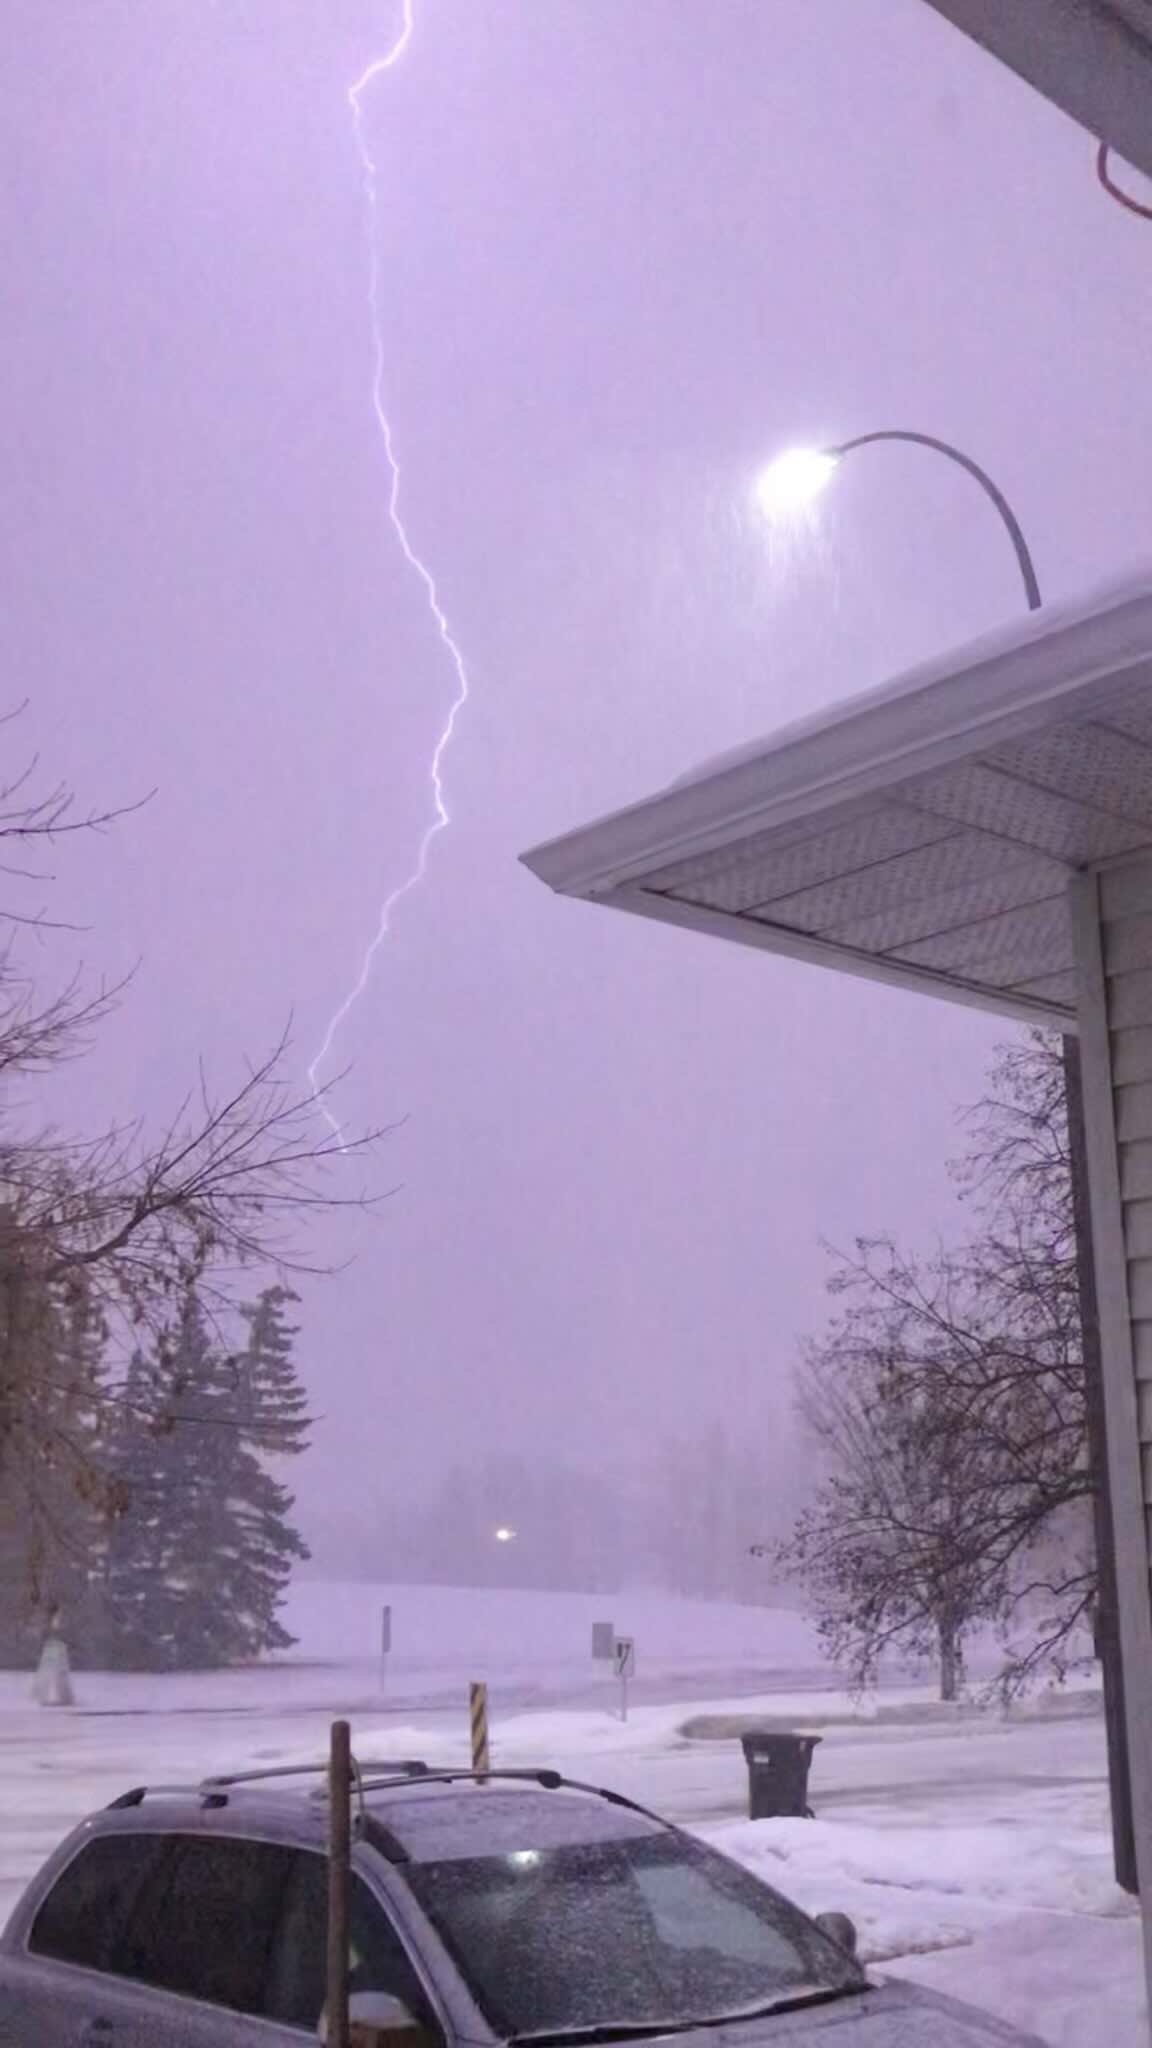 Thundersnow, a snowstorm with thunder and lightning, over Calgary, Canada